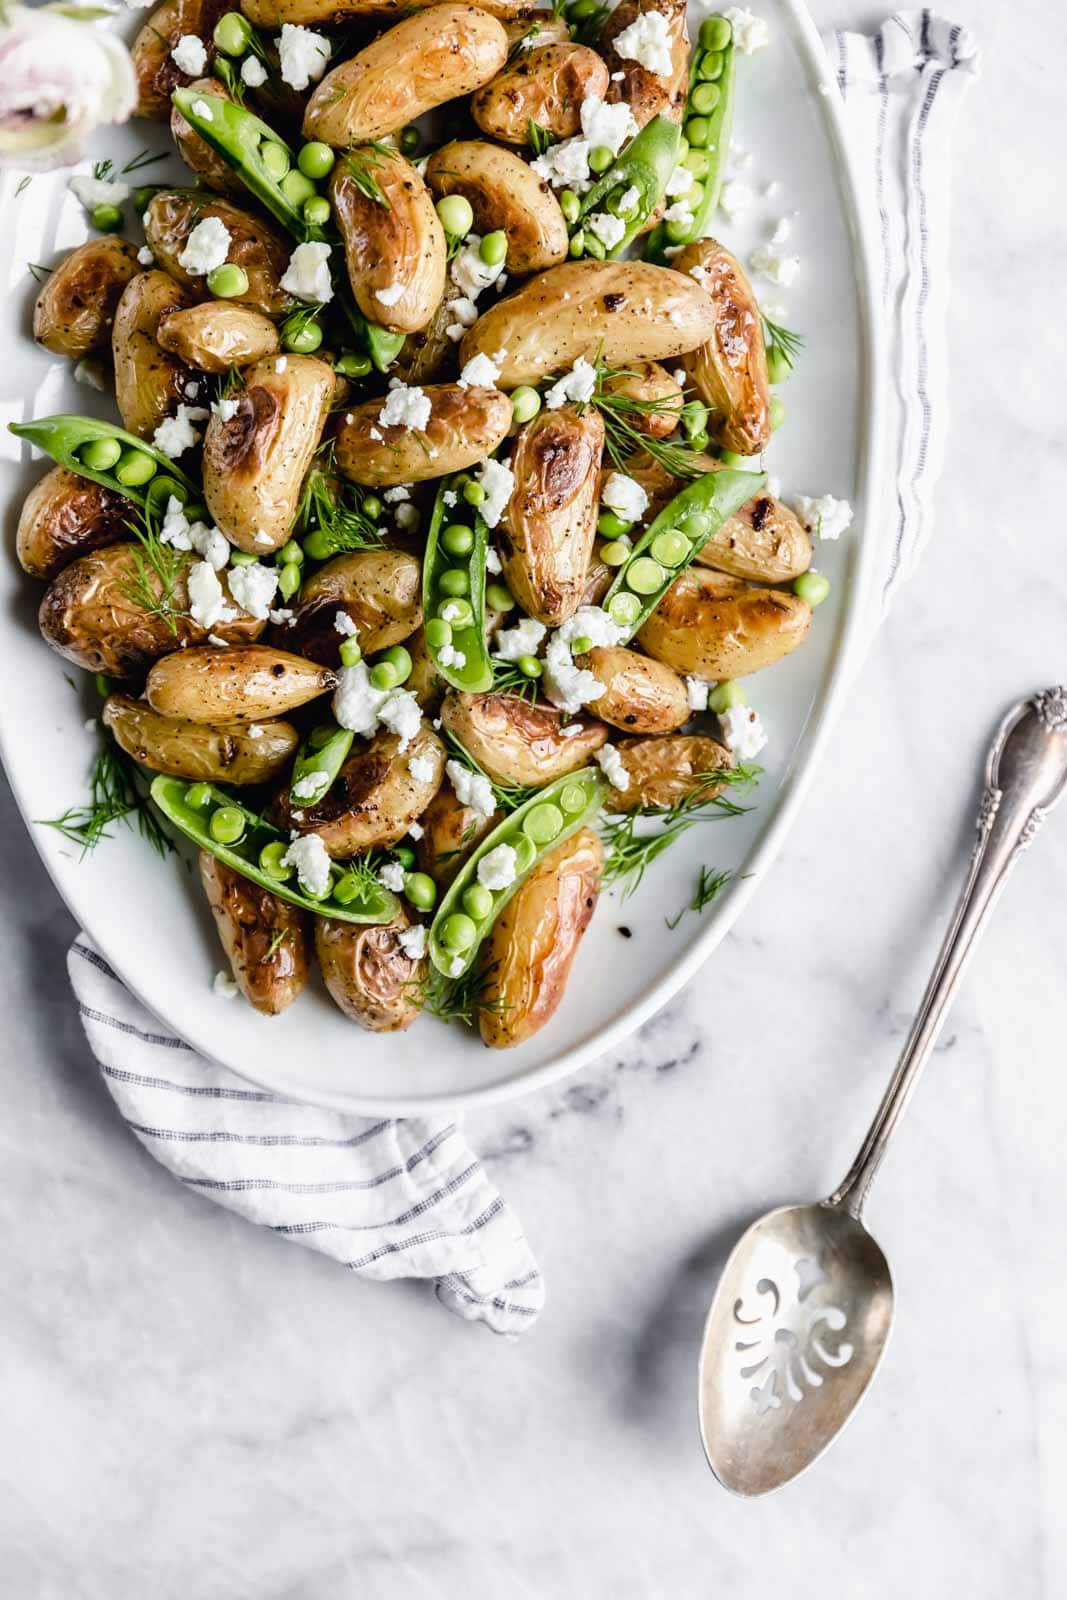 These roasted fingerling potatoes with dill, goat cheese, and peas are our new fav side dish. Full of texture and flavor, you'll love these spring potatoes.